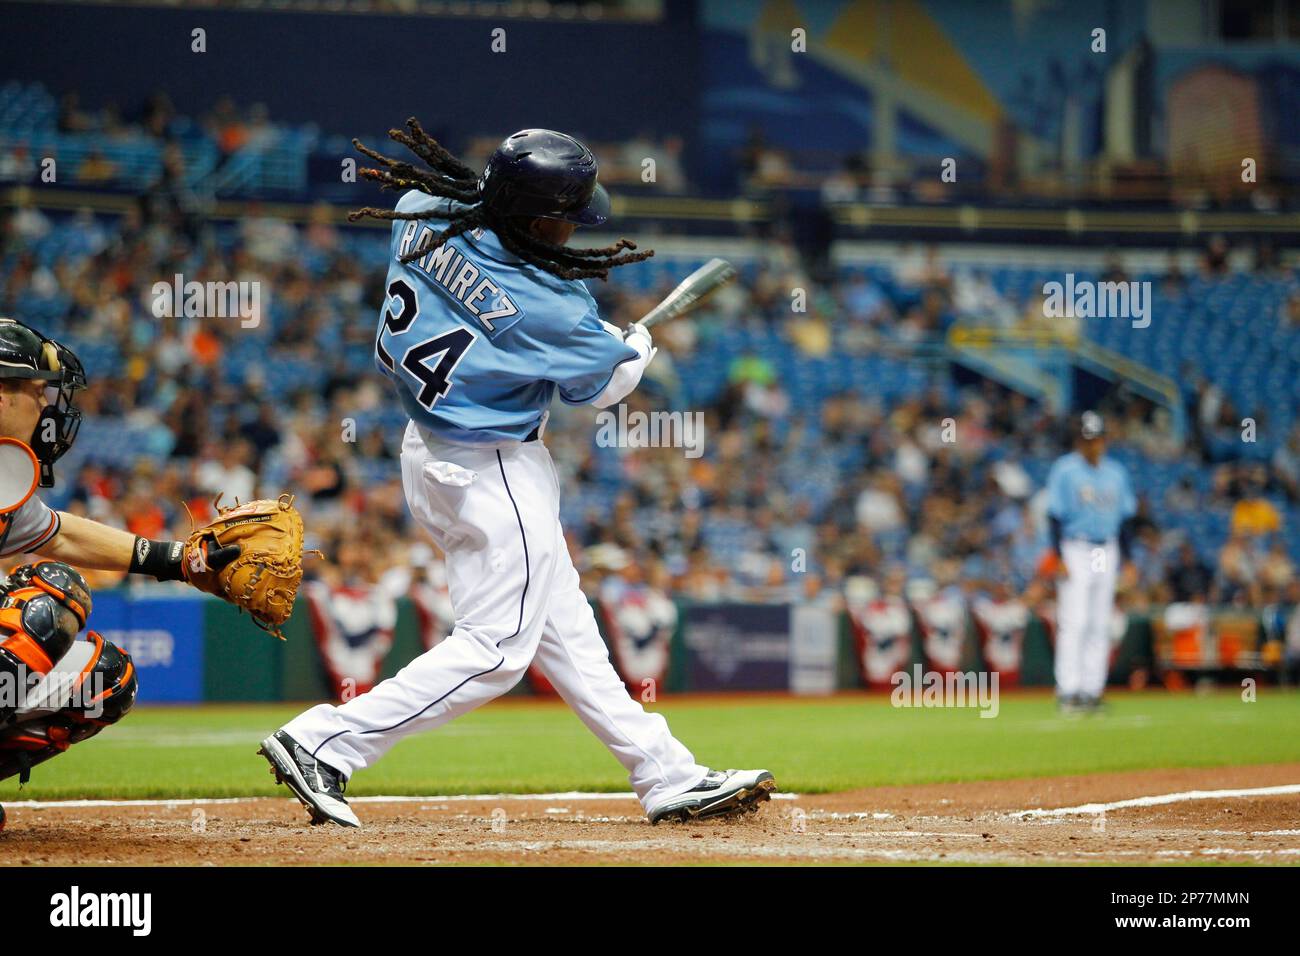 Tampa Bay Rays Manny Ramirez plays in a game against the Baltimore